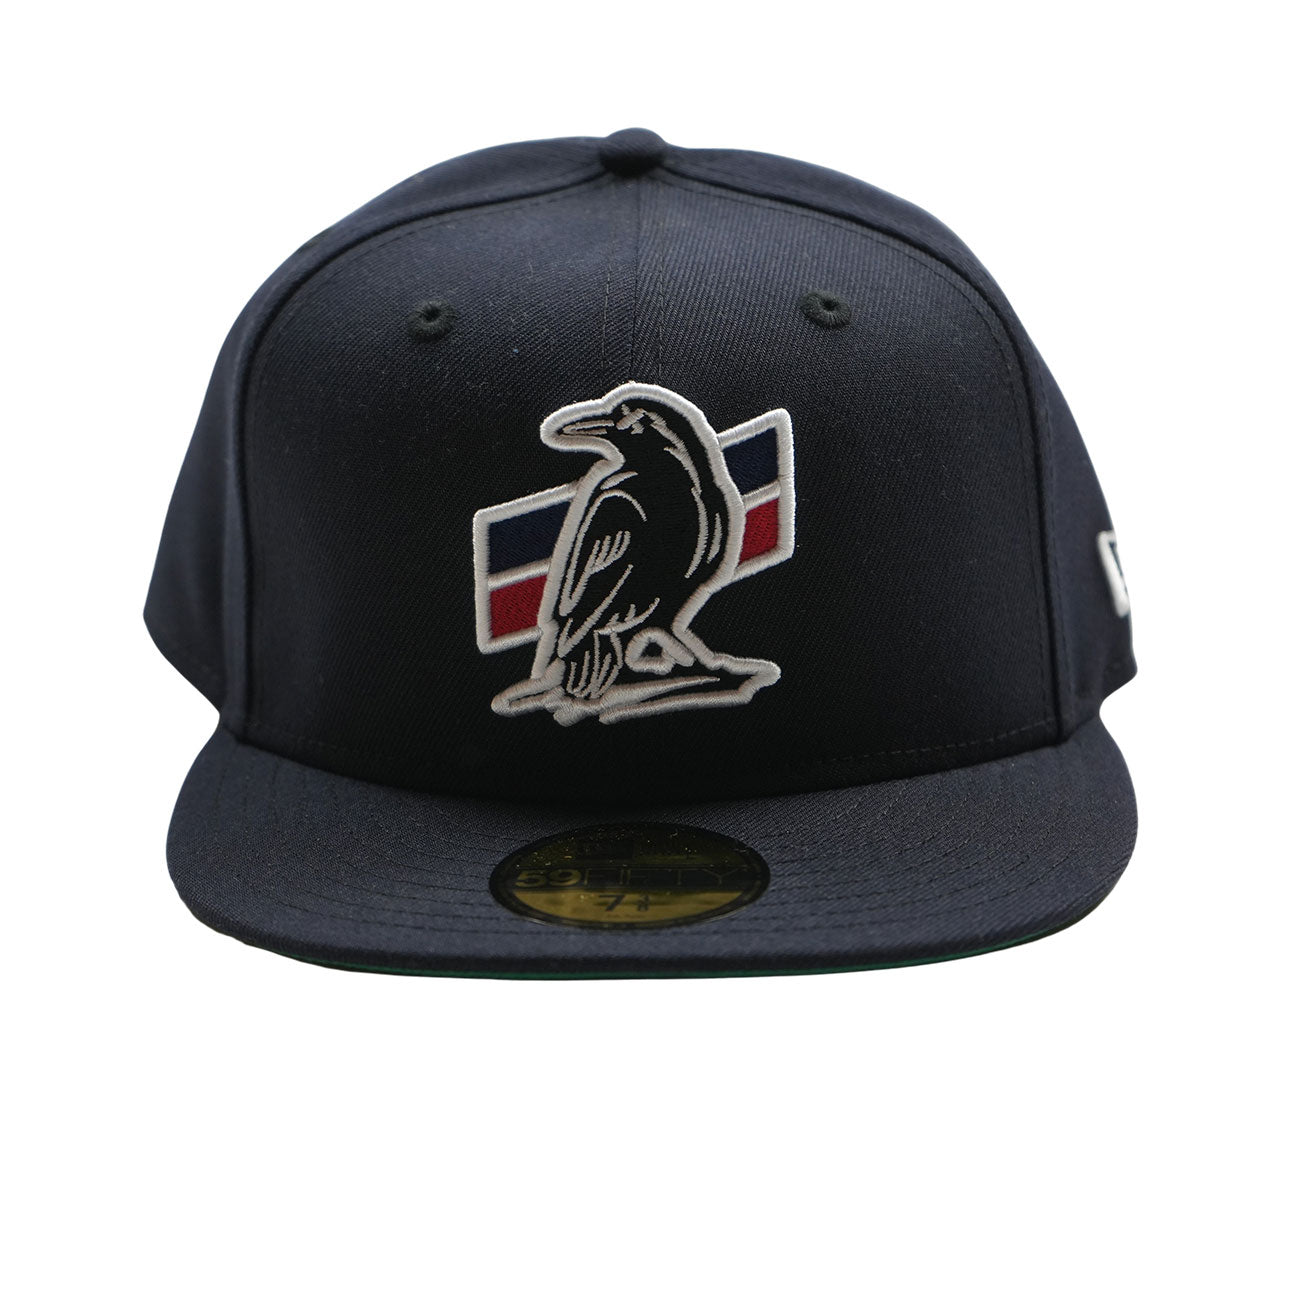 New Era Two18 Fitted Cap (Navy)